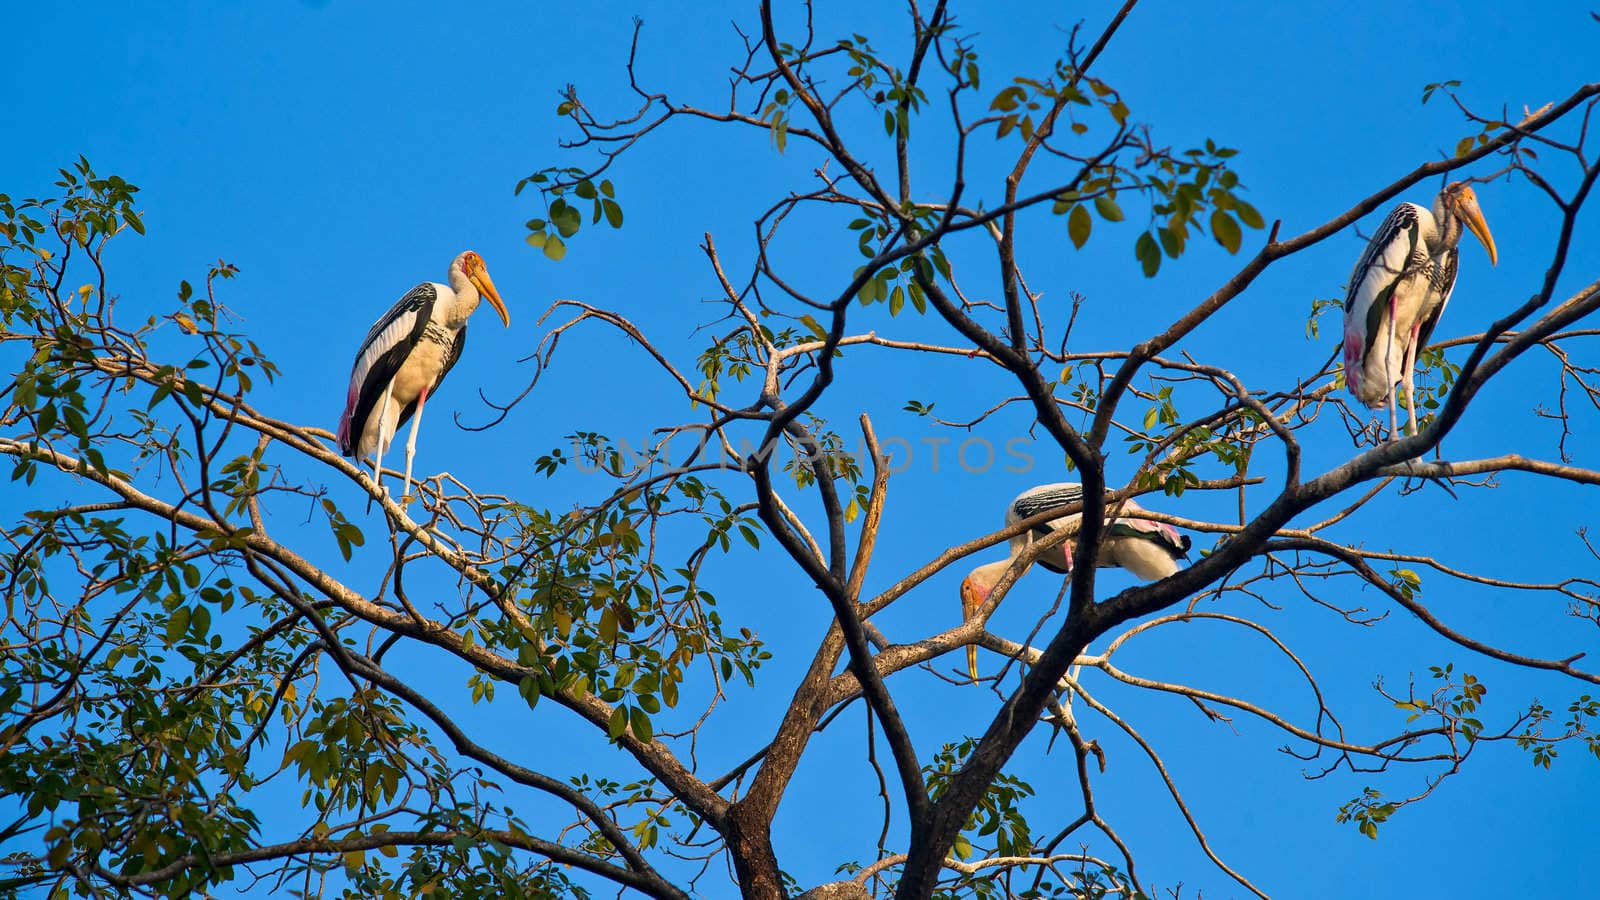 Painted storks by timbrk